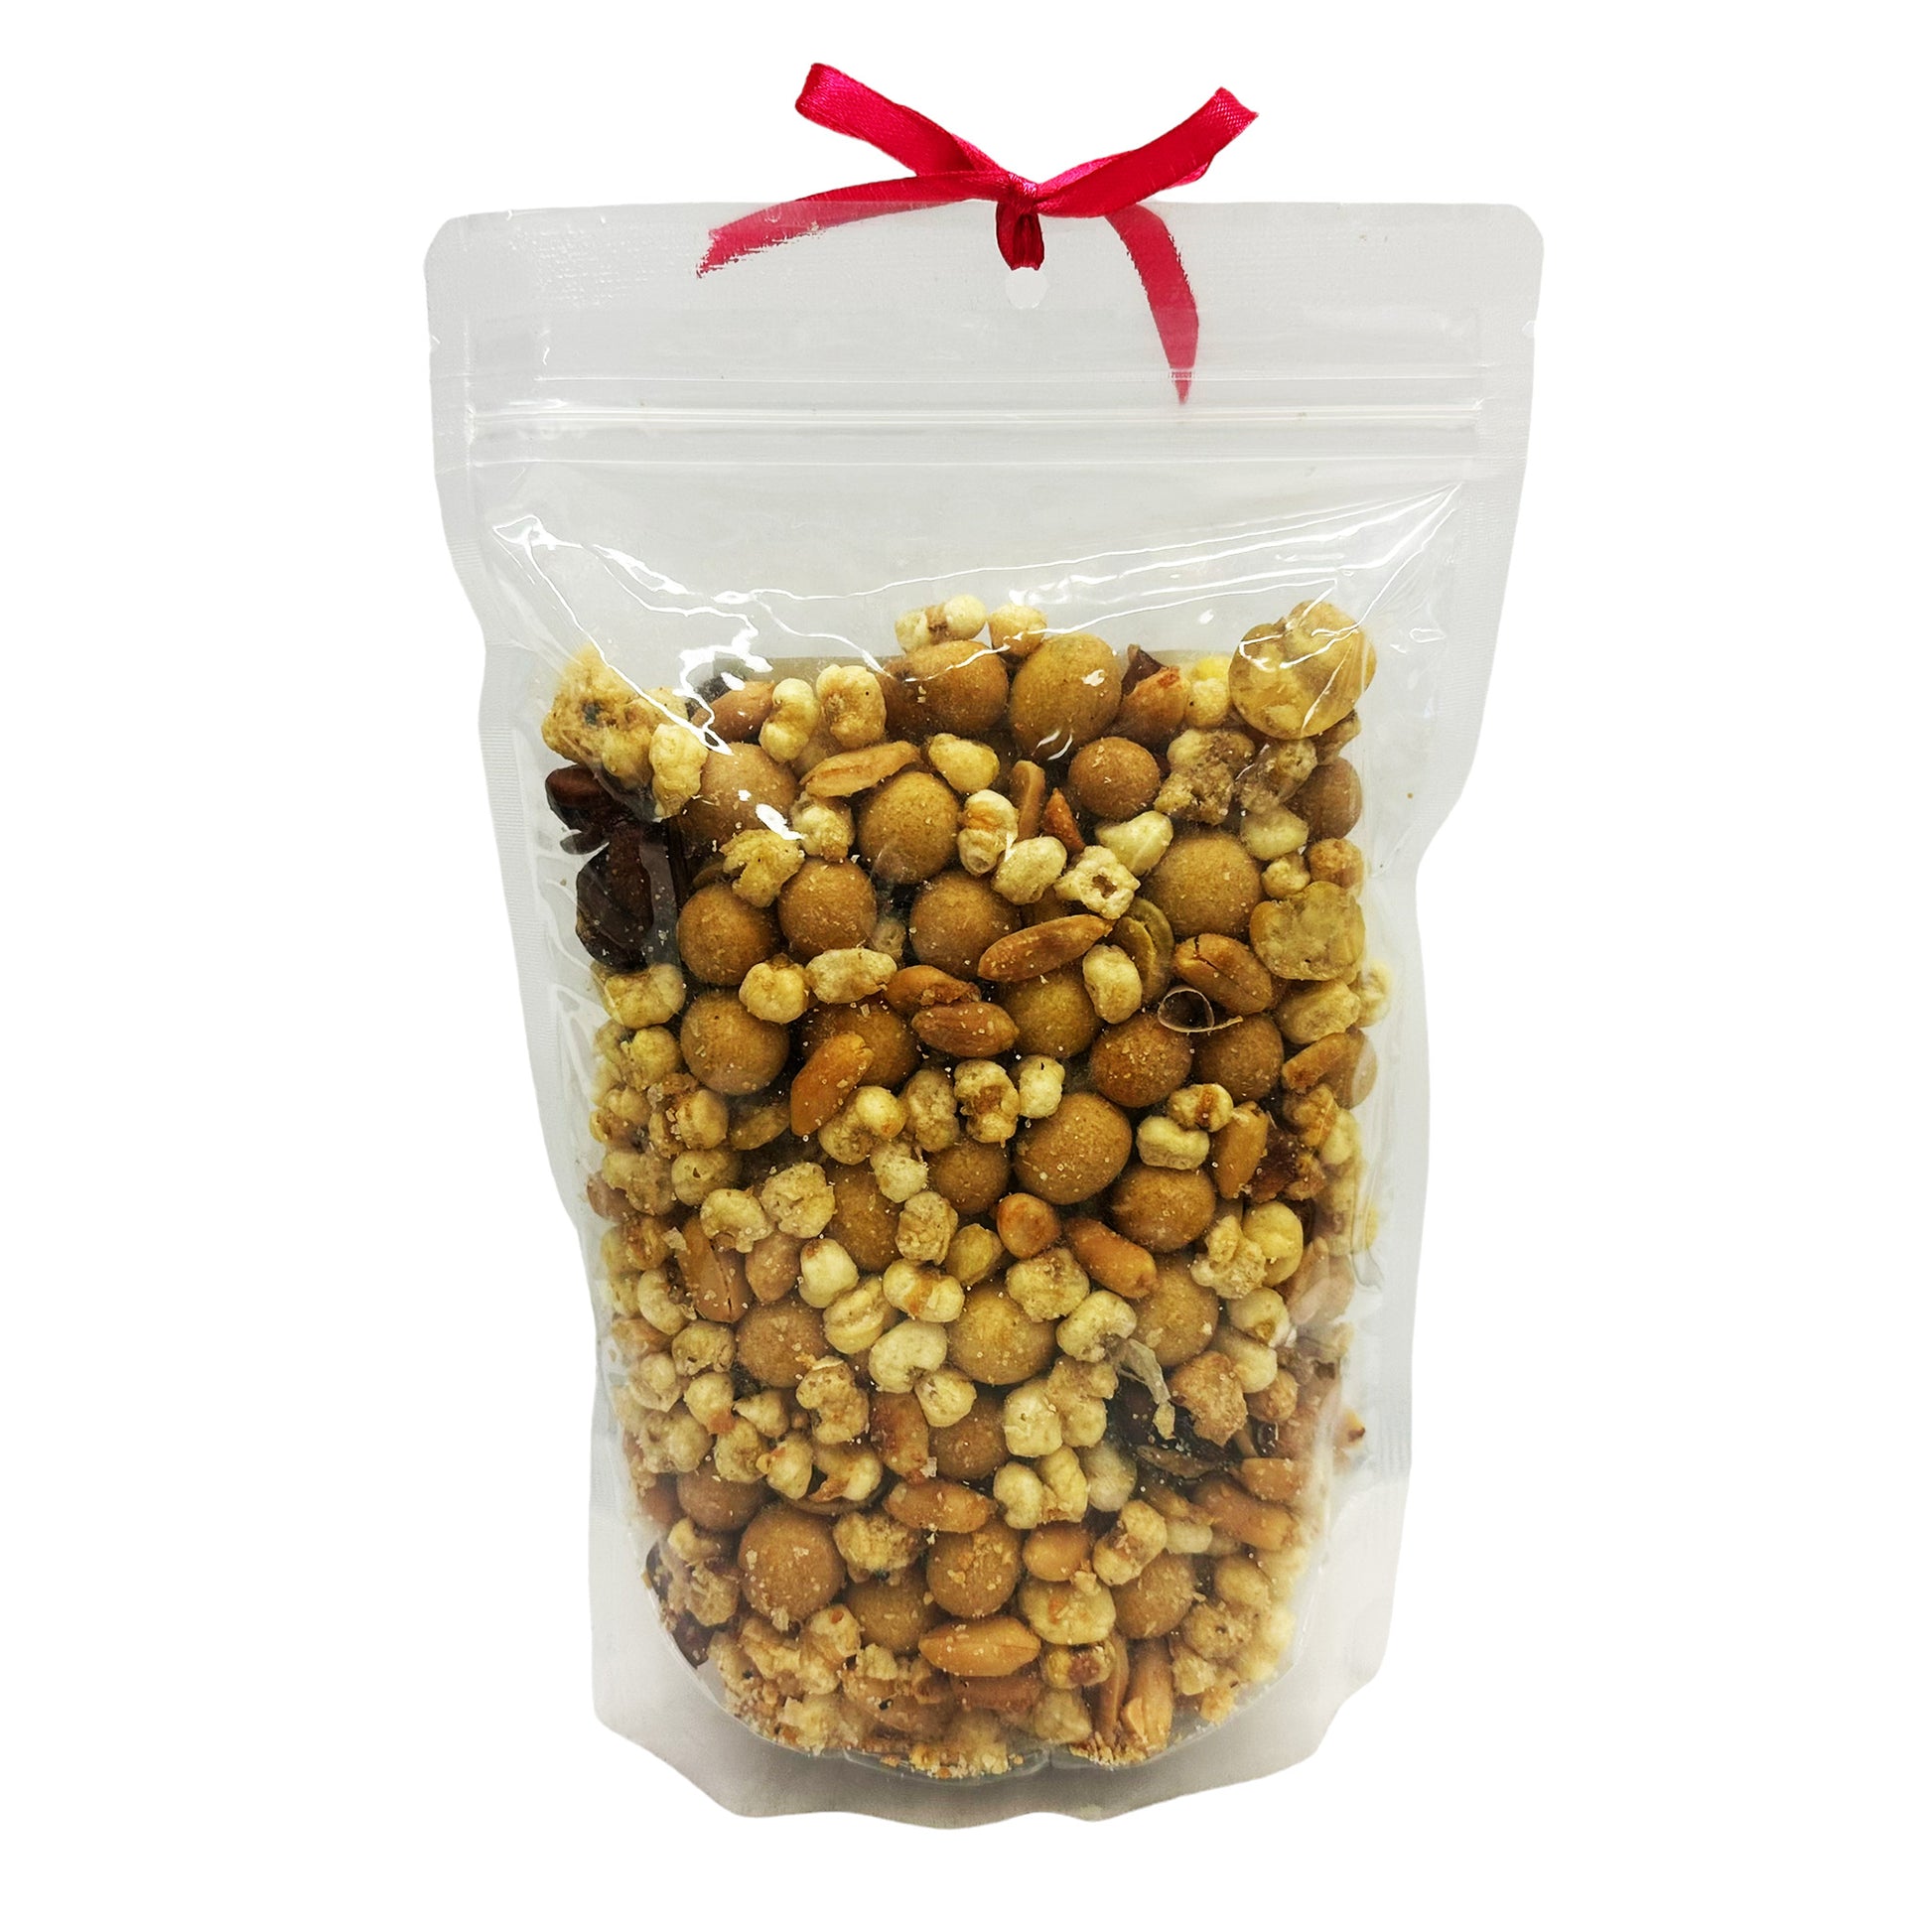 Back graphic image of Inday Bawang Special Cornick With Mixed Nuts - Garlic Flavor 10.58oz (300g)